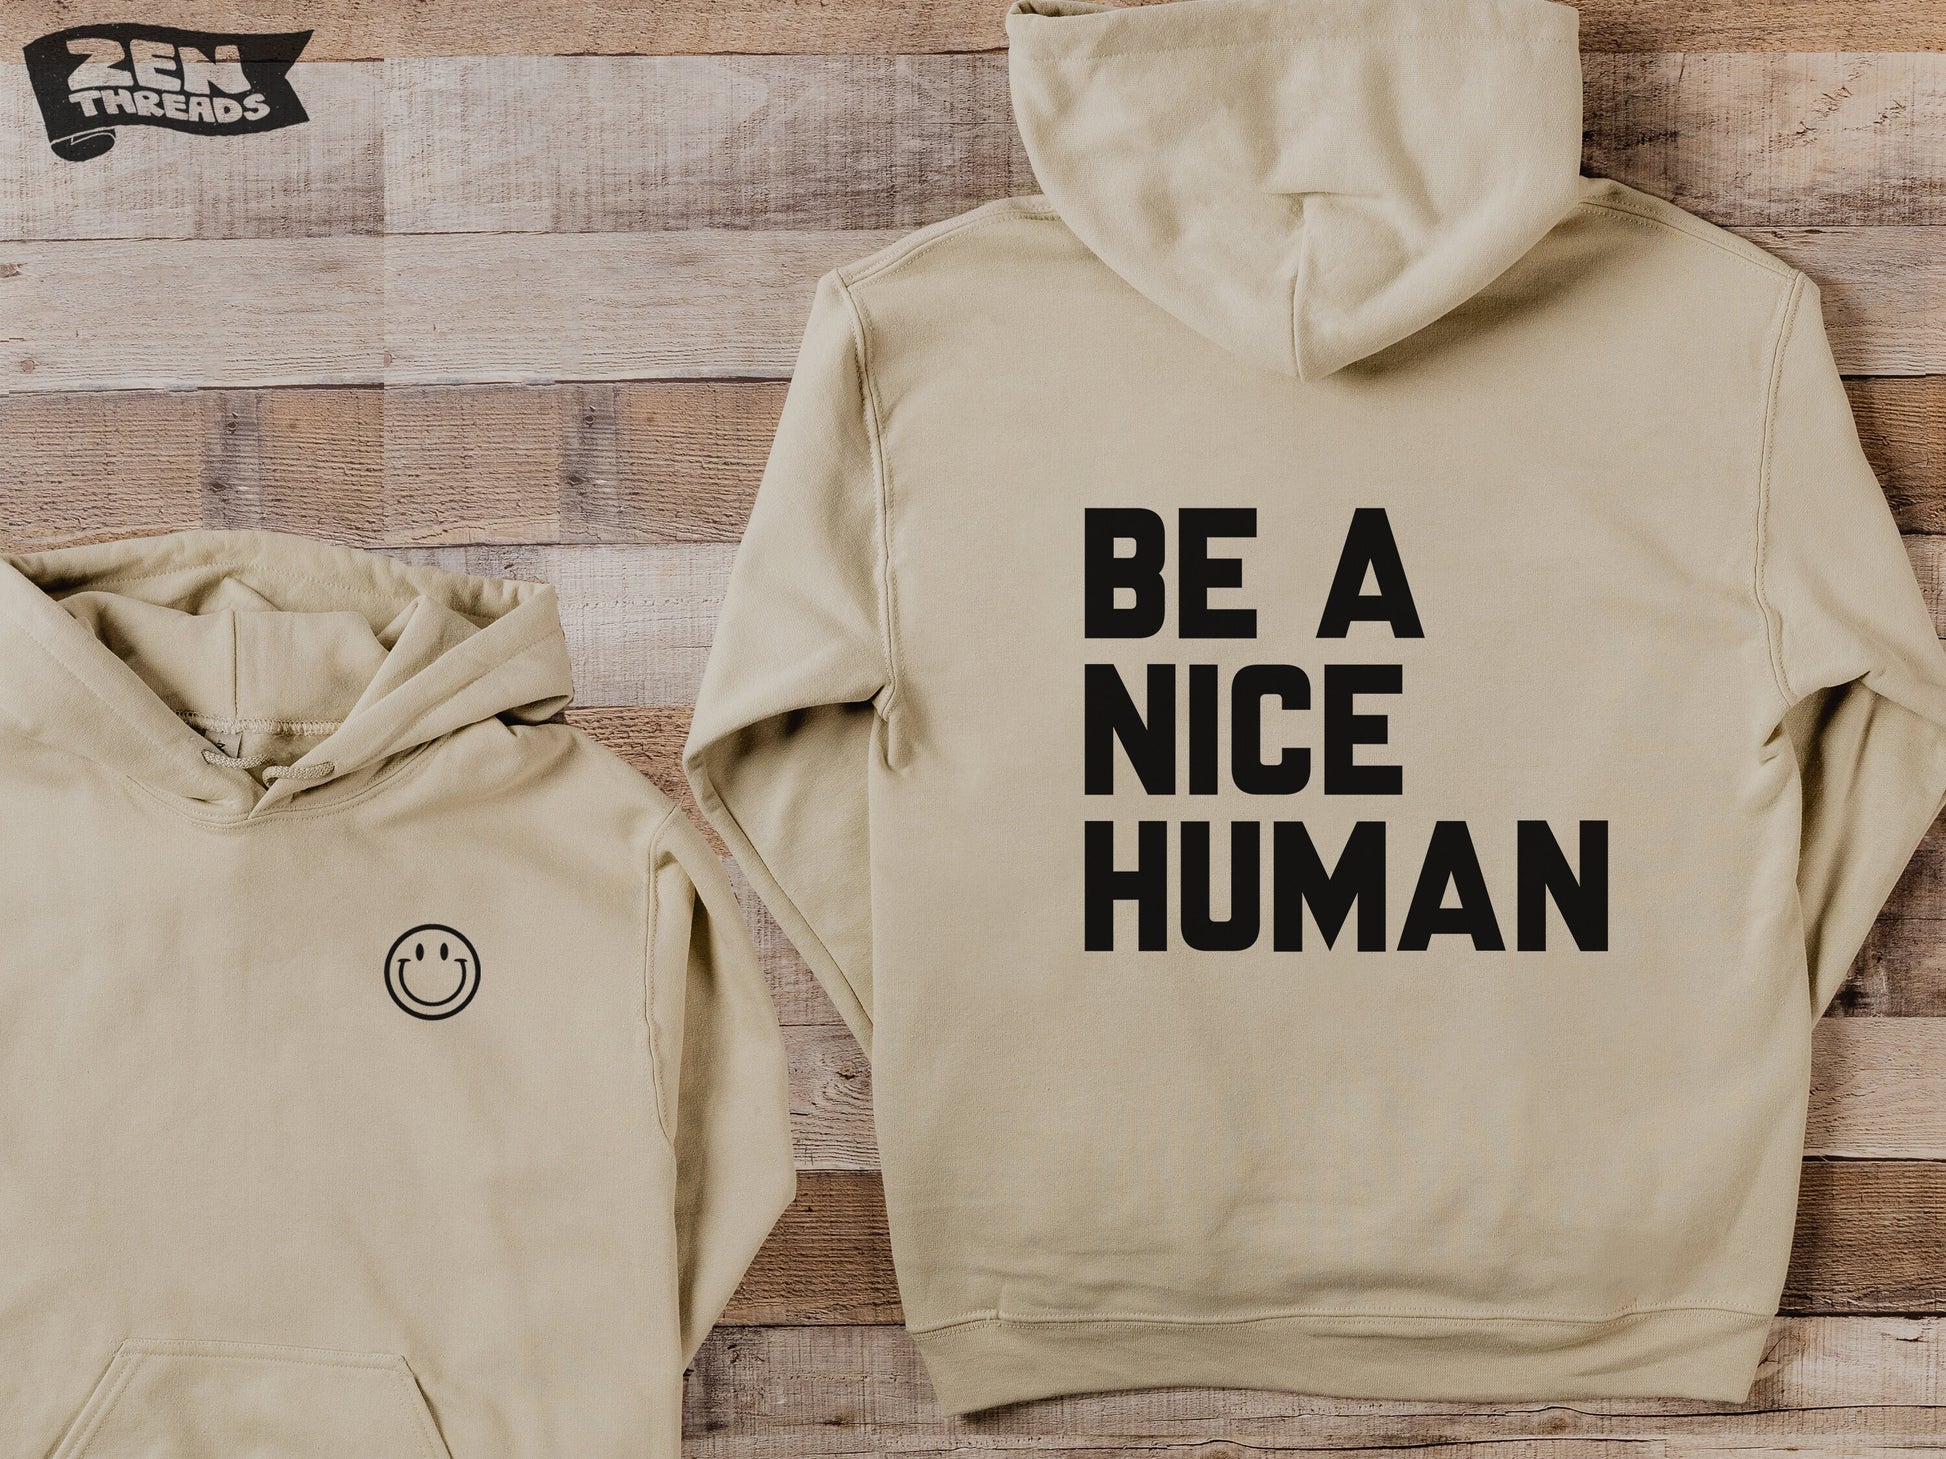 Be A Nice Human Unisex Classic Hoody heavy weight fleece pullover hooded drawstring mens women's youth all sizes colors kindness sweatshirt